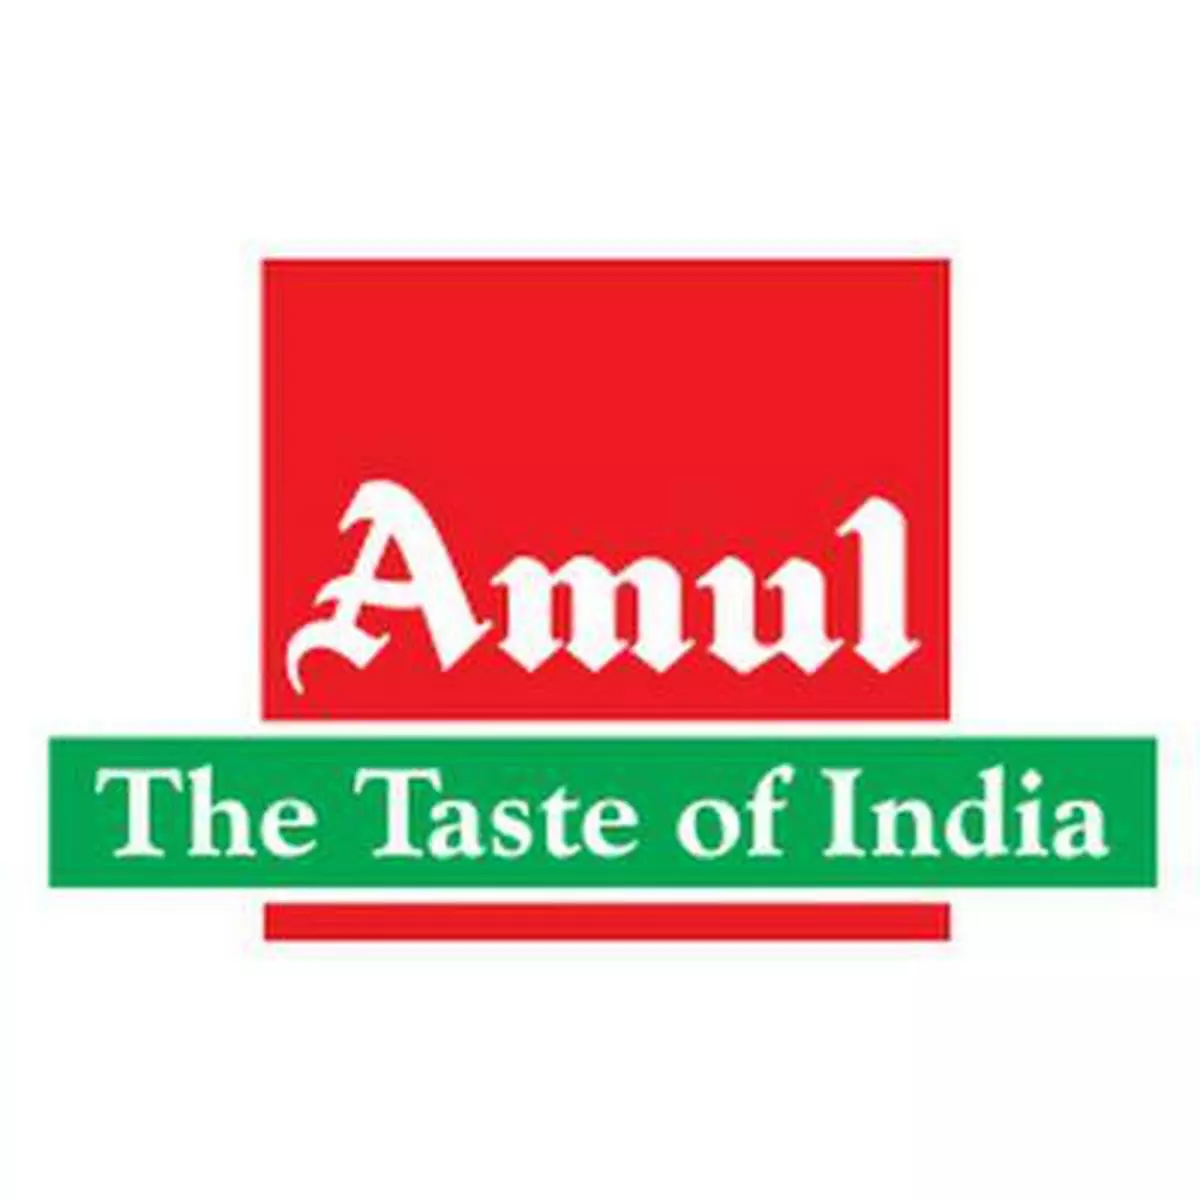 In the co-operative sector, the export turnover of GCMMF which owns the AMUL brand, was highest at ₹1,530 crore whereas its turnover was ₹46,481 crore in 2021-22